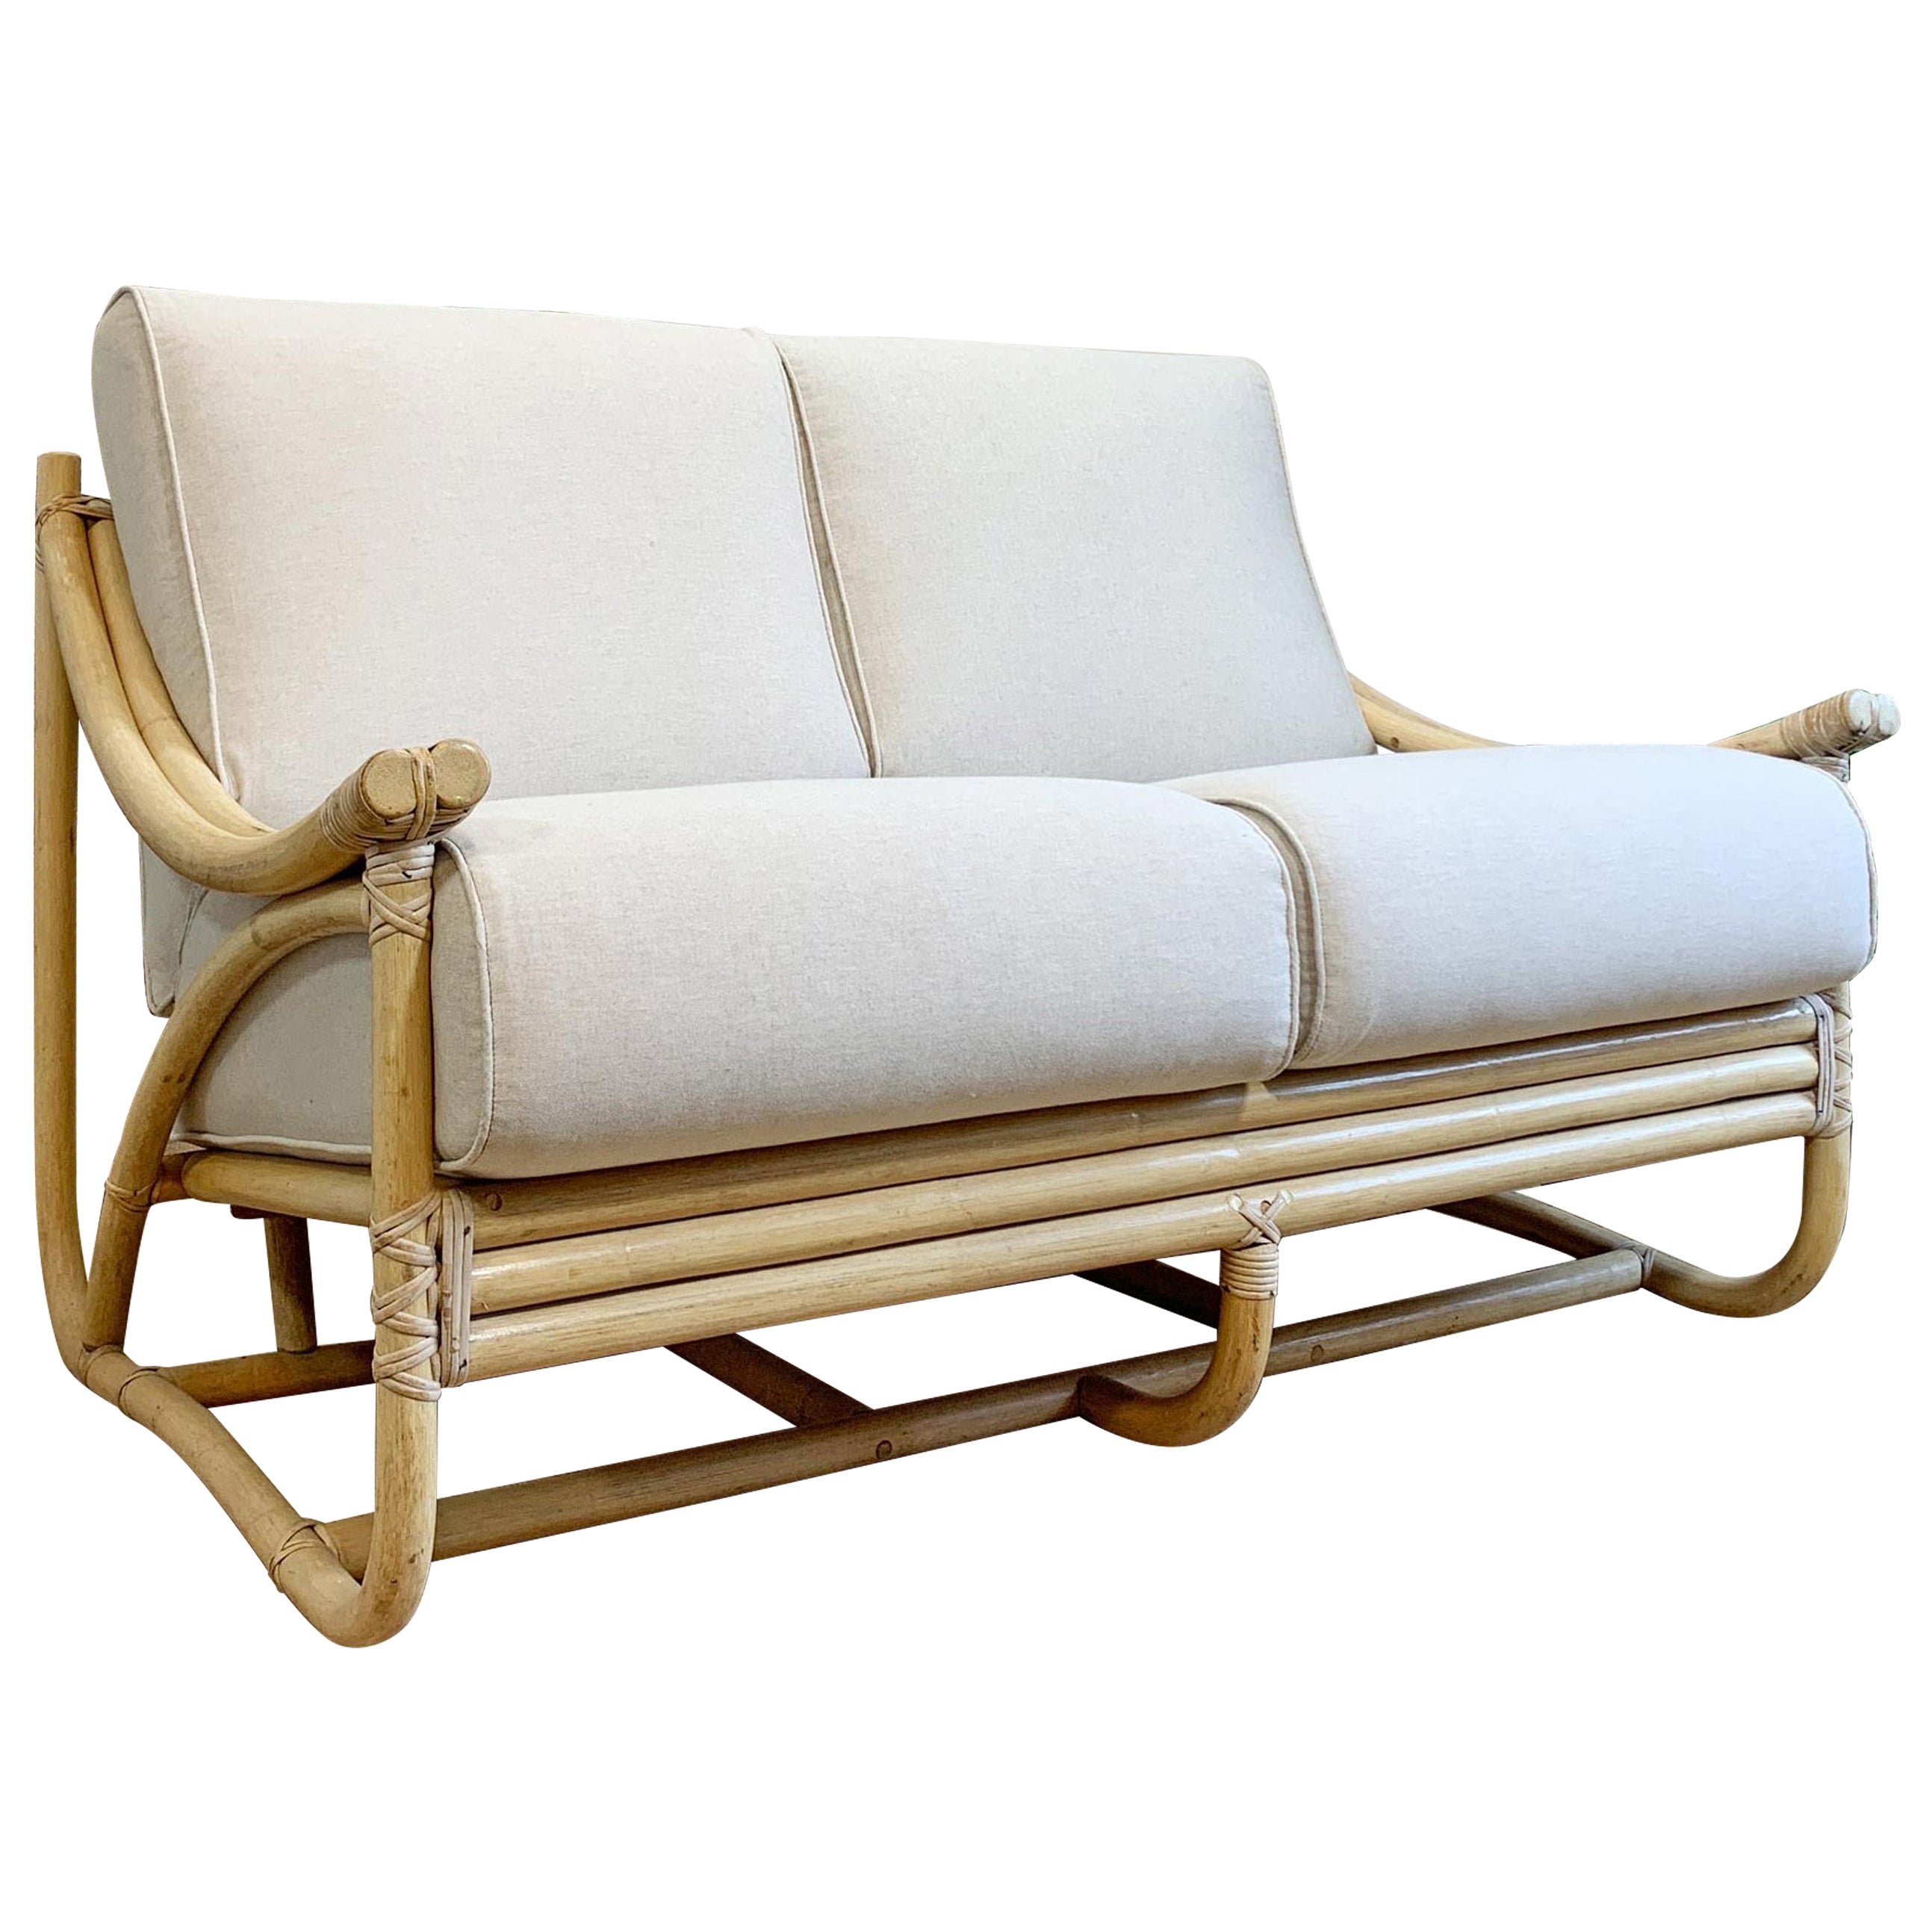 Angraves of Leicester Rattan-Sofa 1950er Jahre